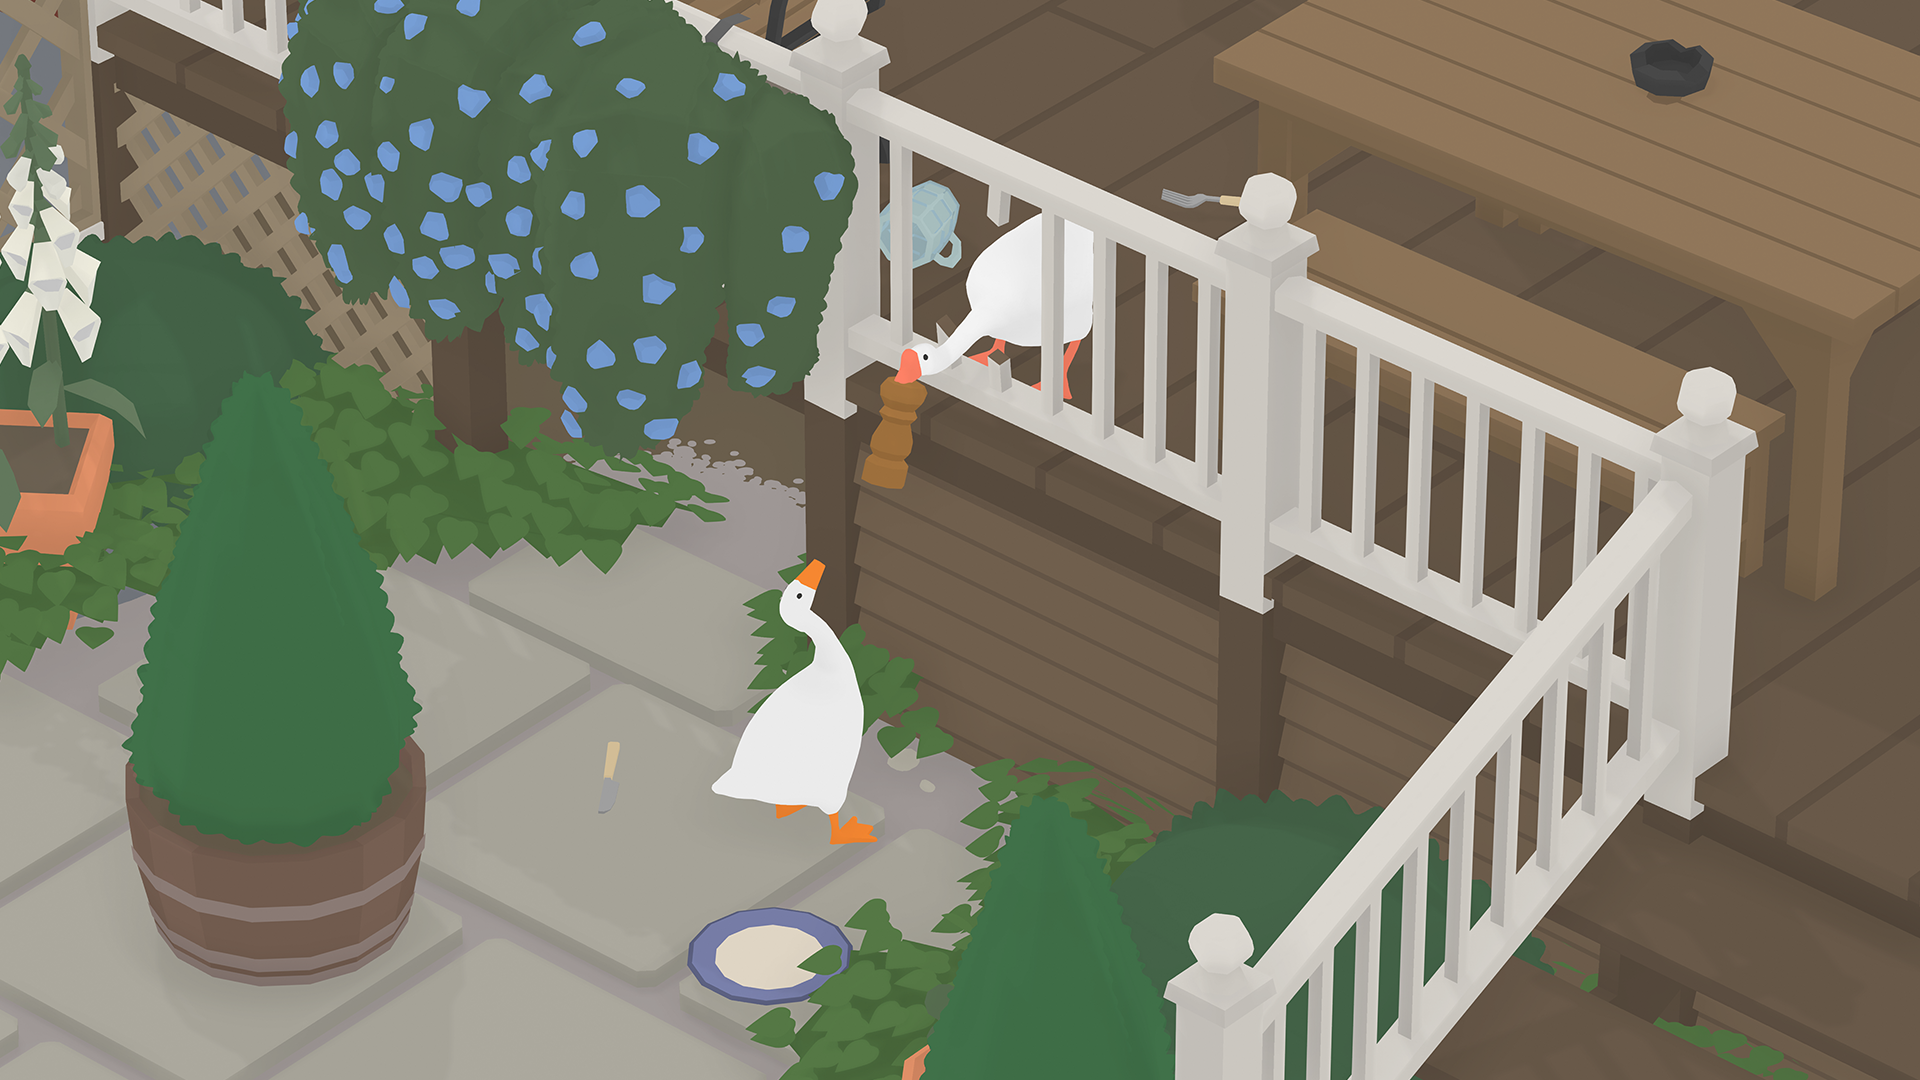 UNTITLED GOOSE GAME Parte 2 in 2023